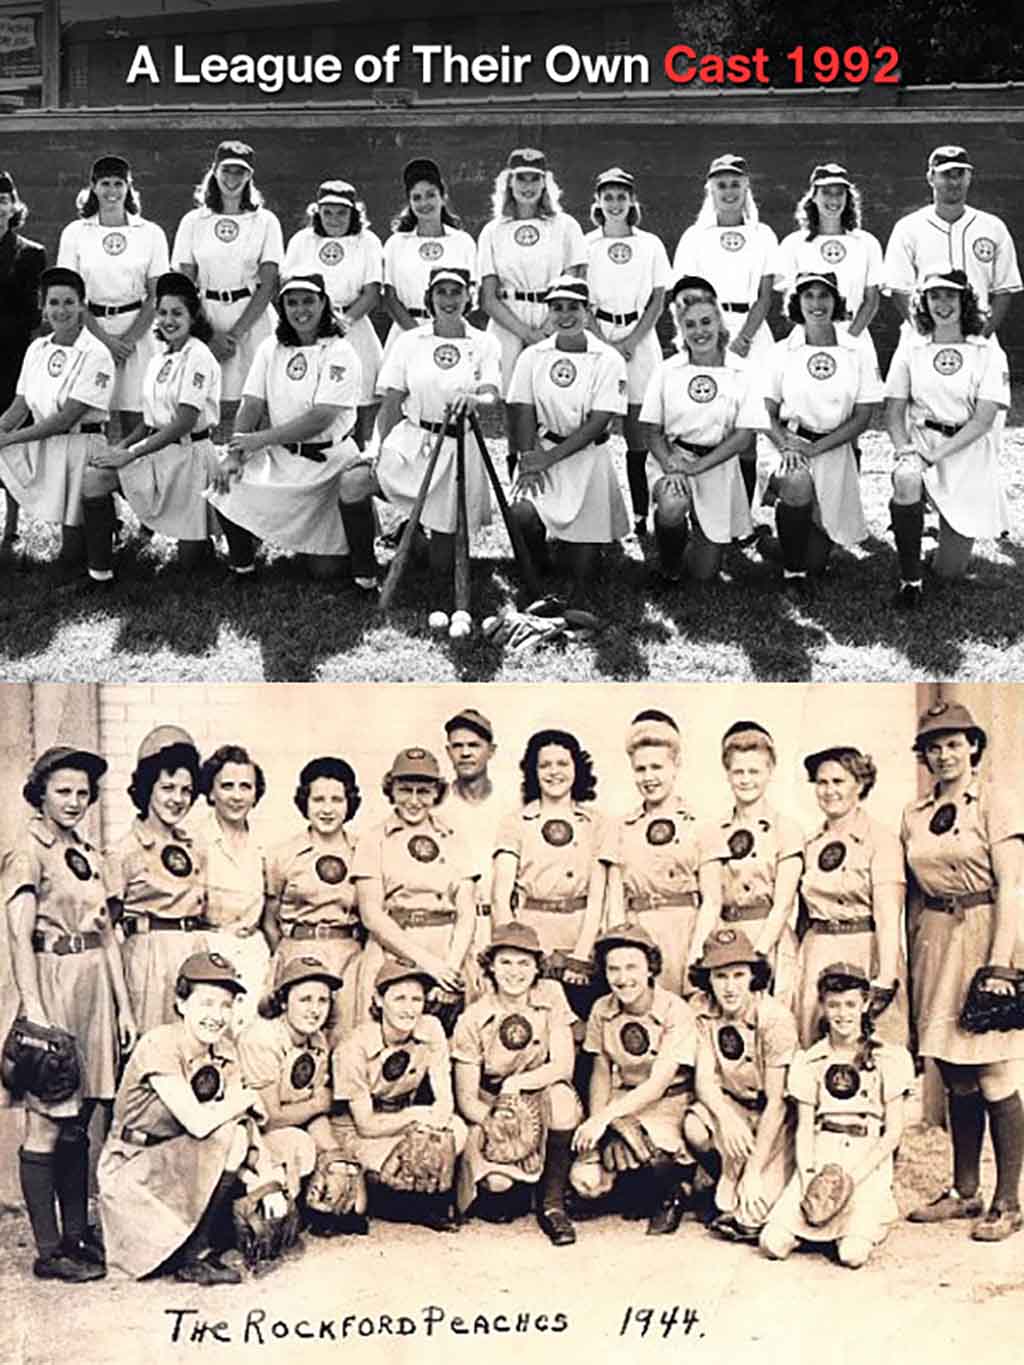 A League of Their Own: A True Story Behind the Classic Film